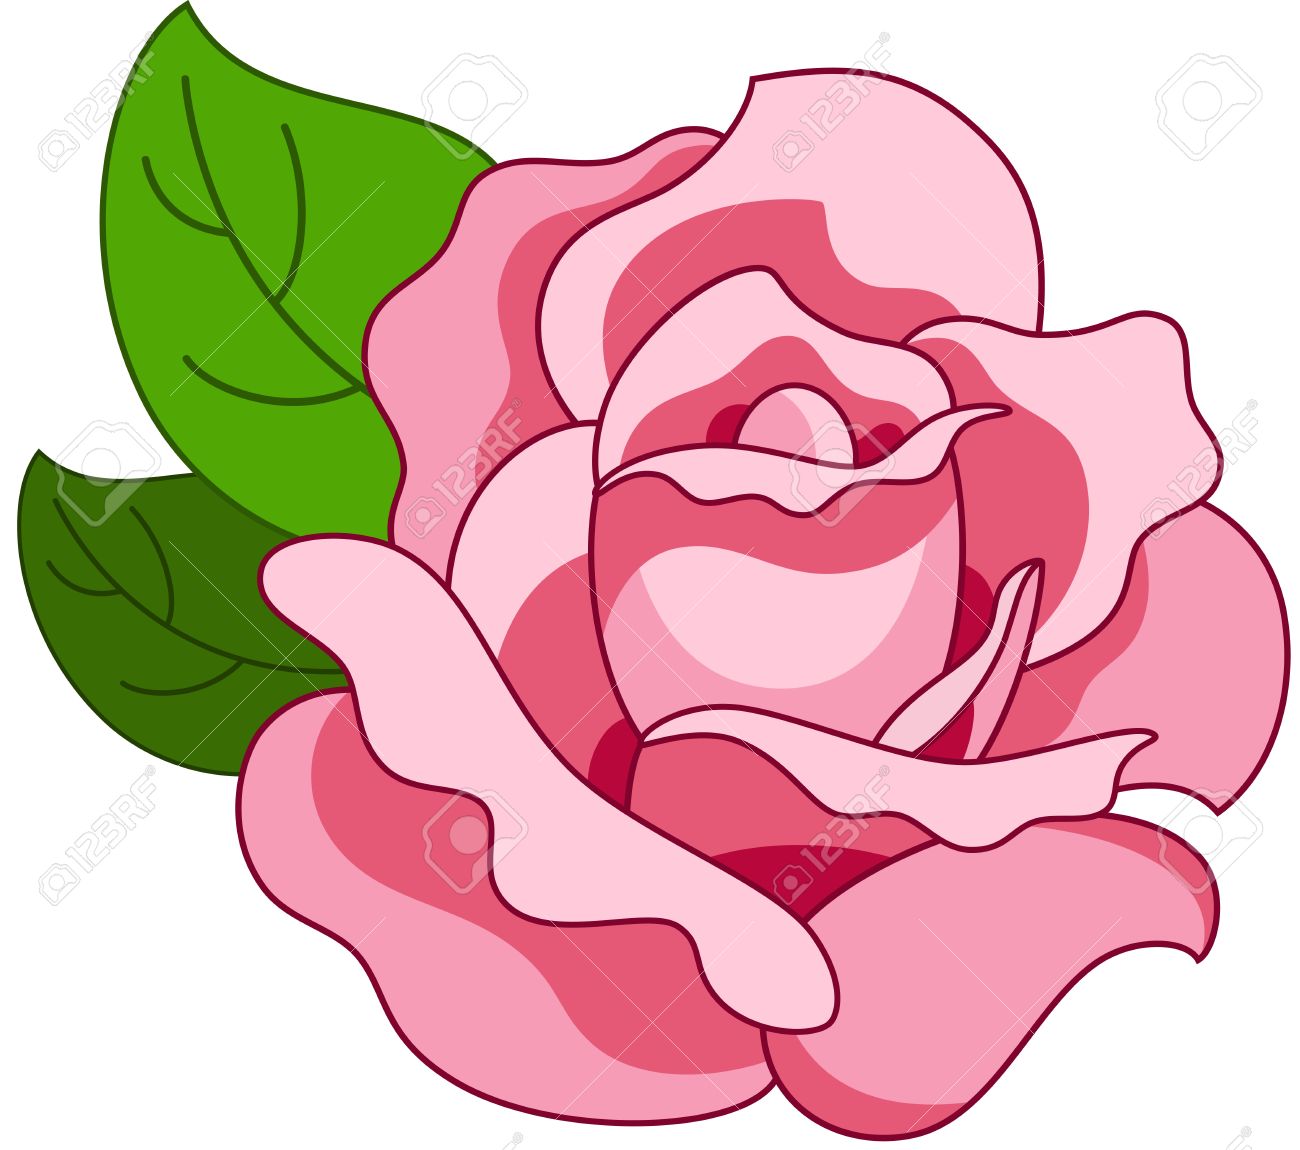 rose cartoon Cartoon pictures of roses group jpg - Clipartix